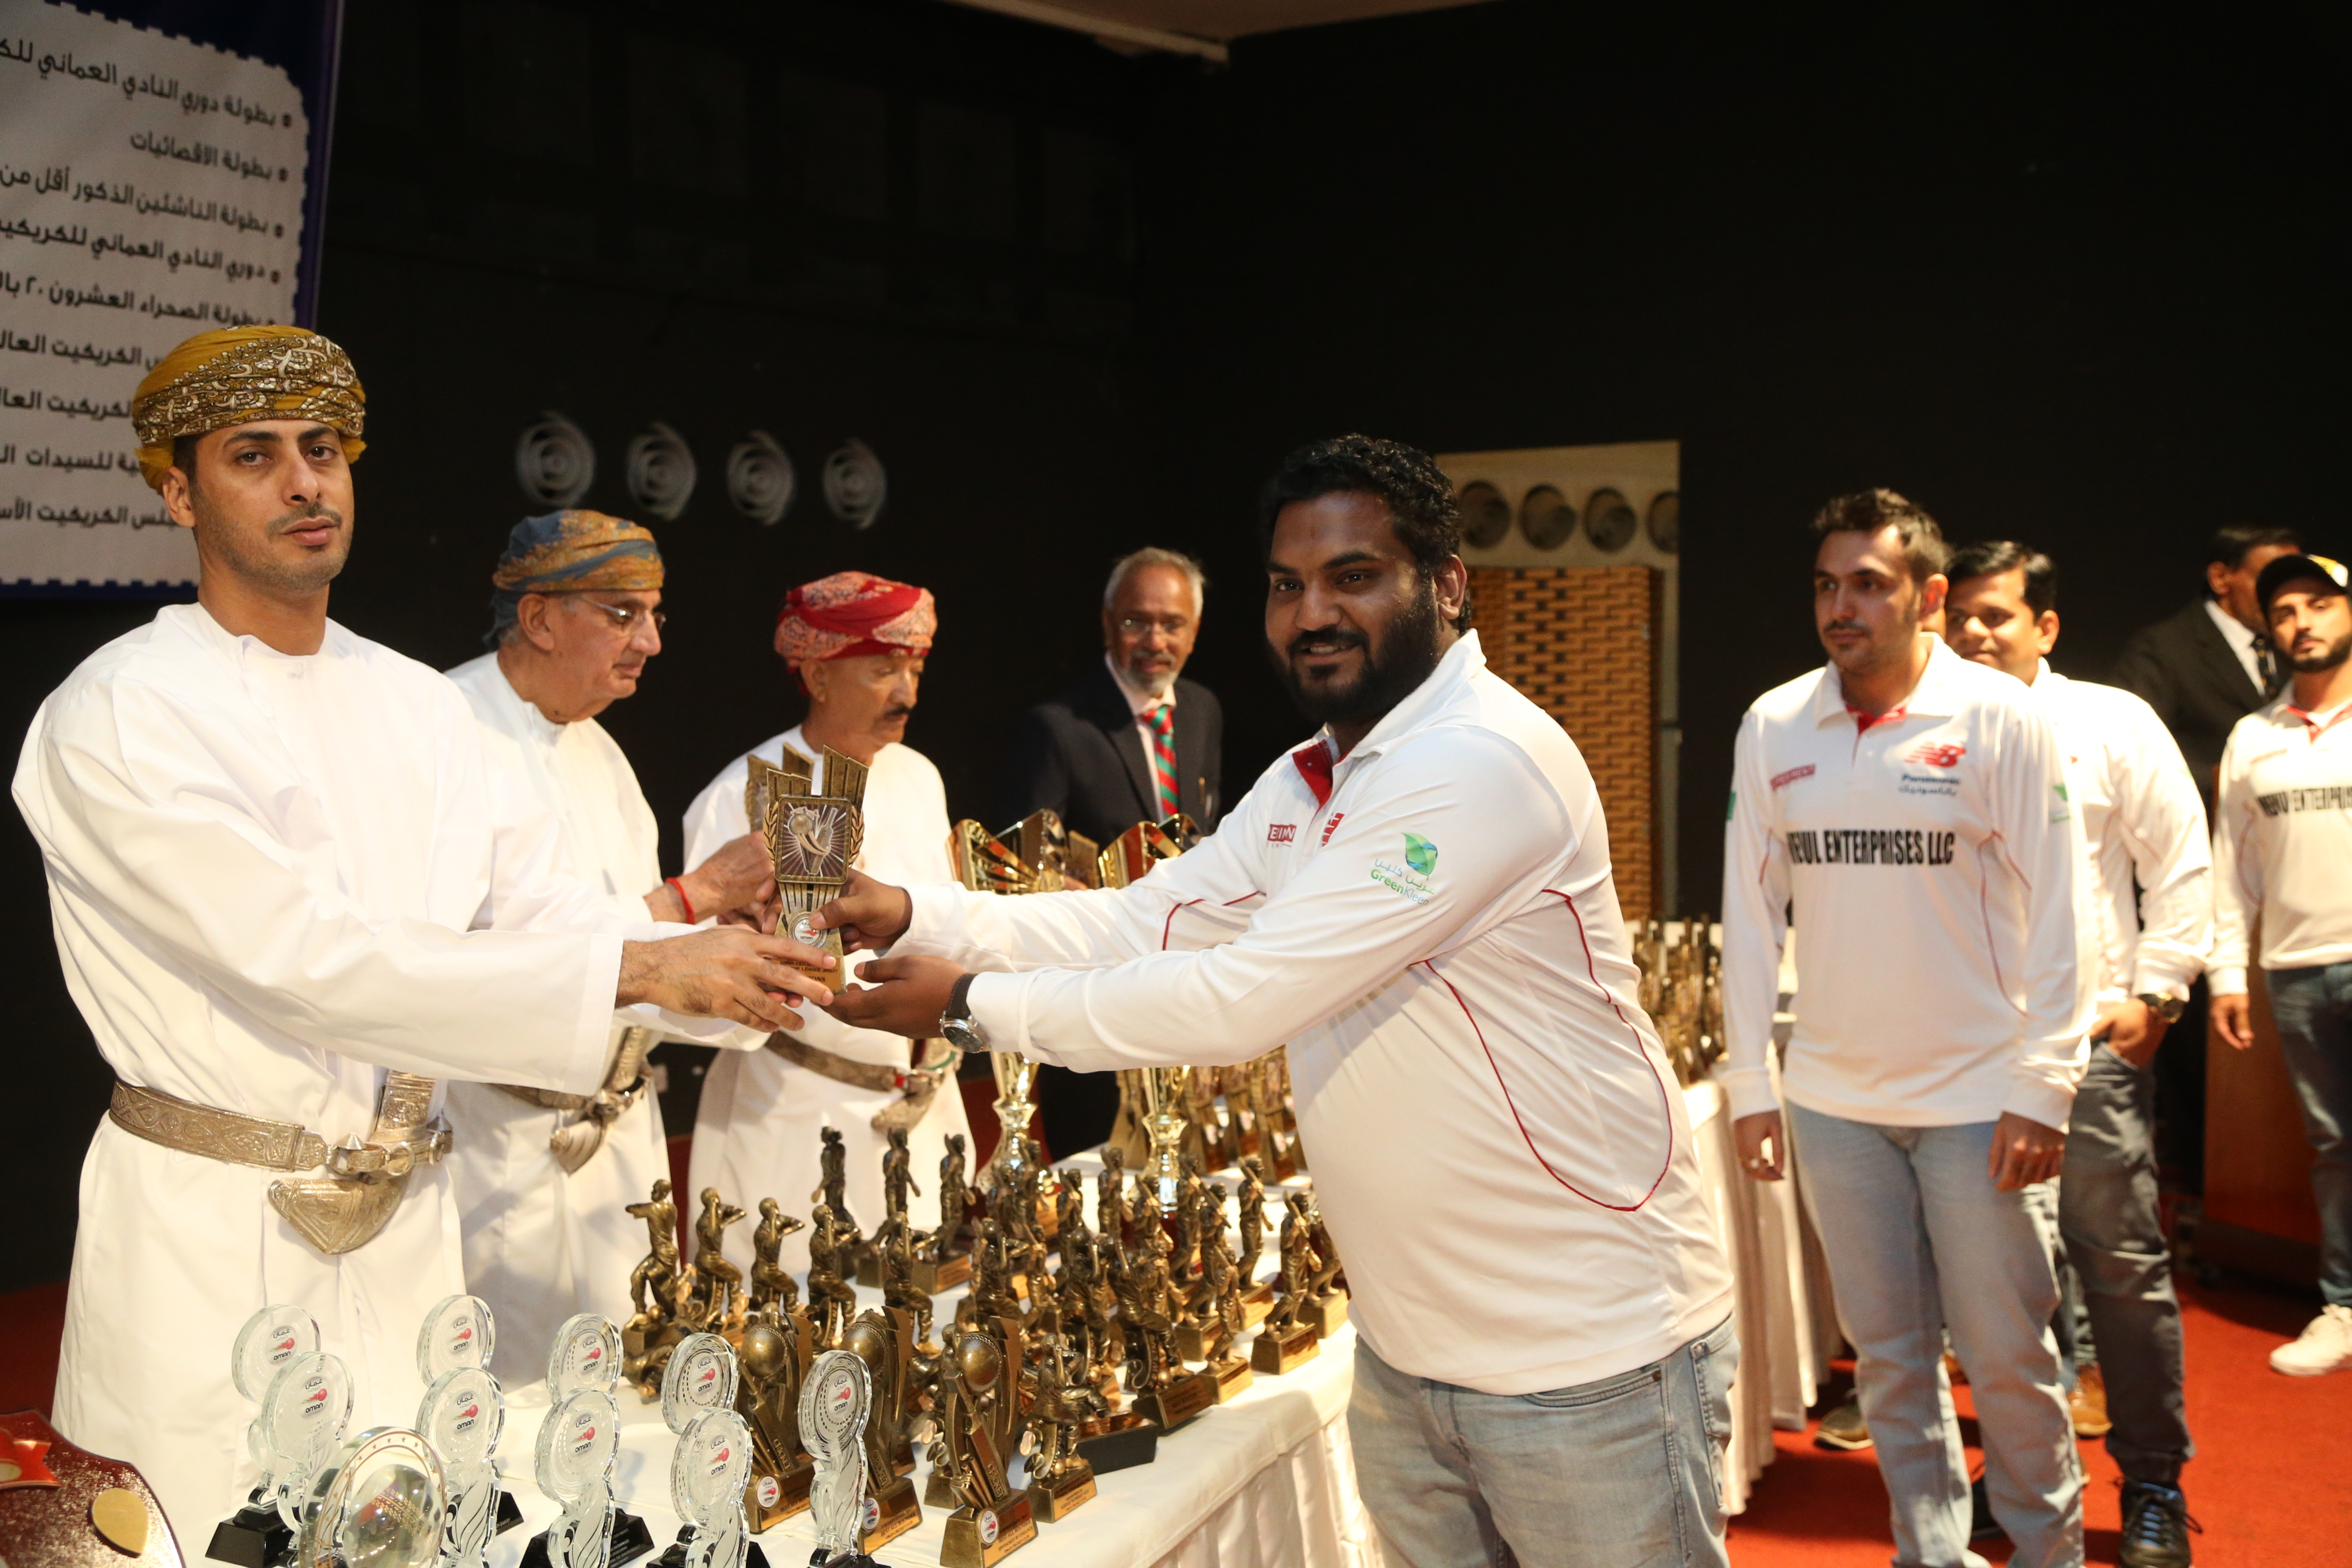 In pictures: Oman Cricket Awards Gala 2016-17